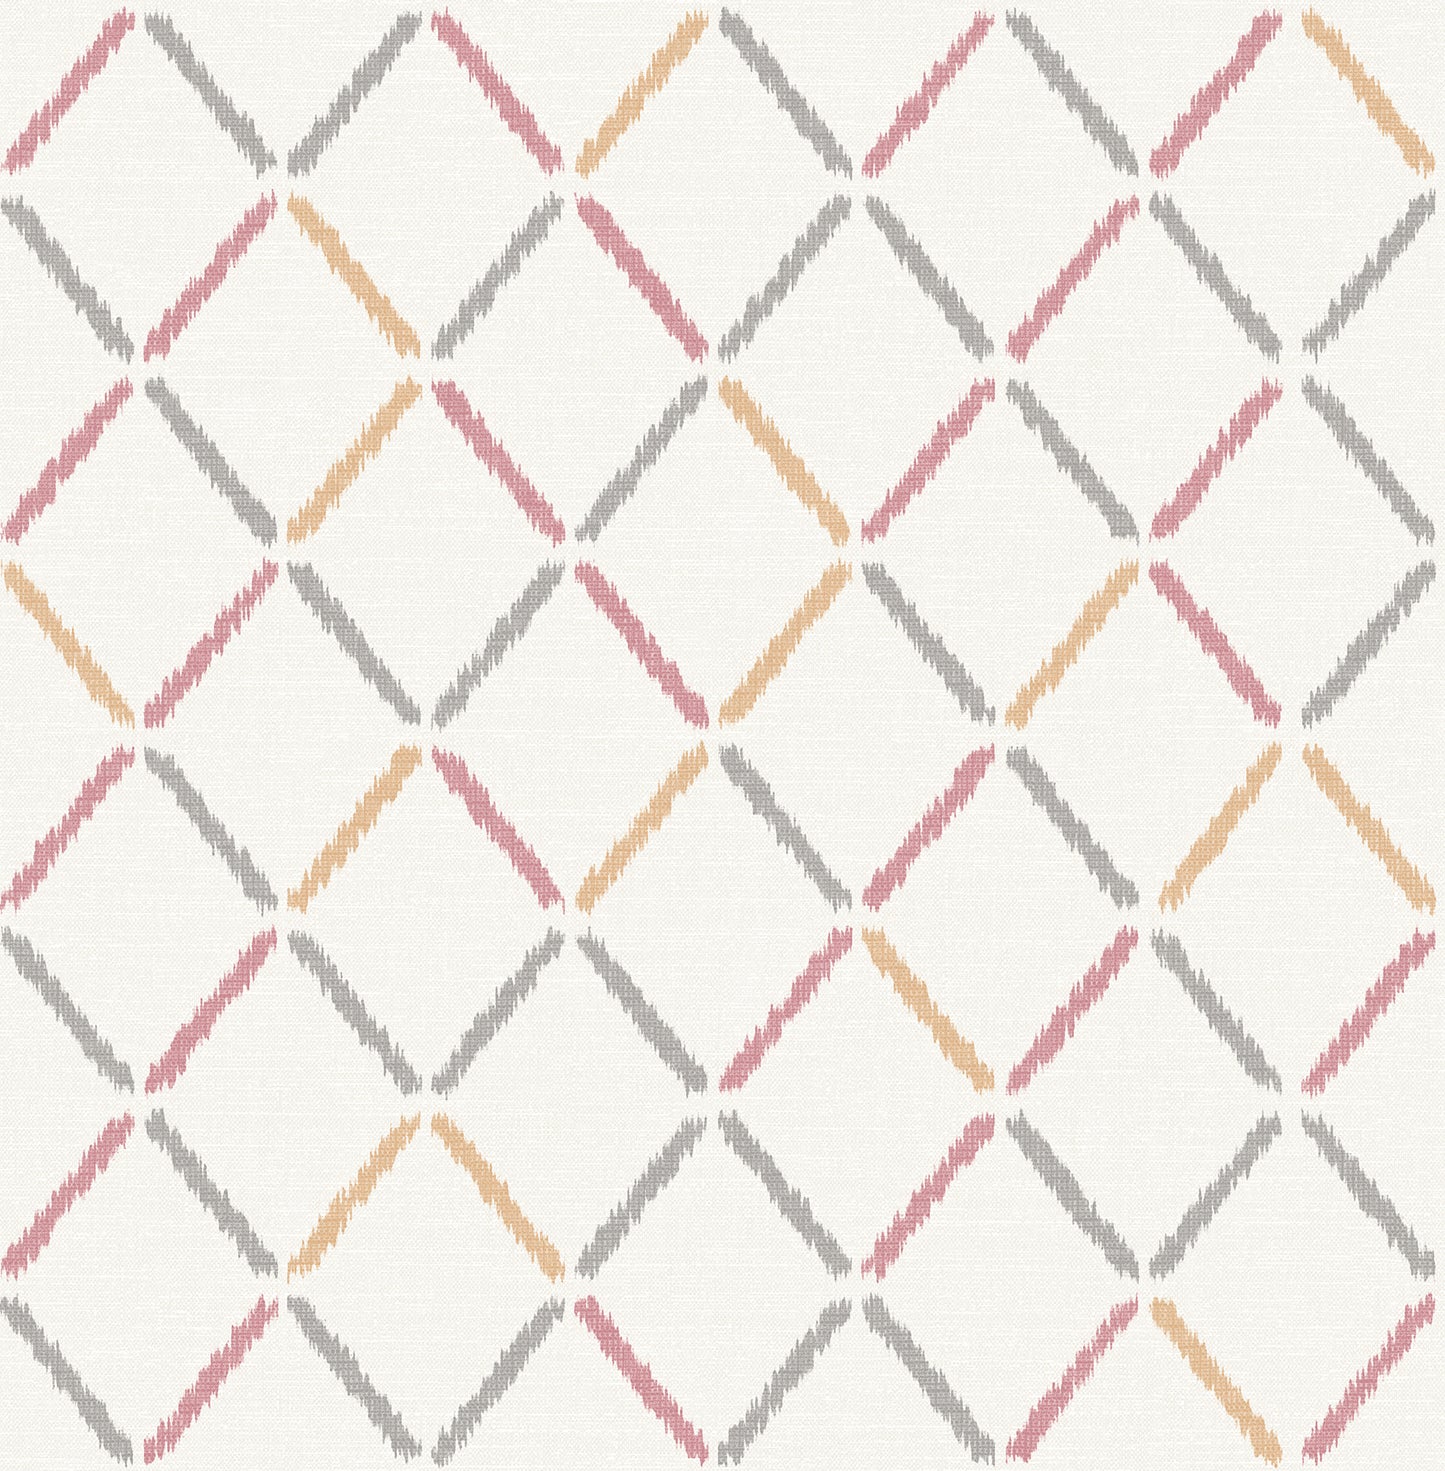 Looking for 2902-25536 Theory Allotrope Rose Linen Geometric A Street Prints Wallpaper